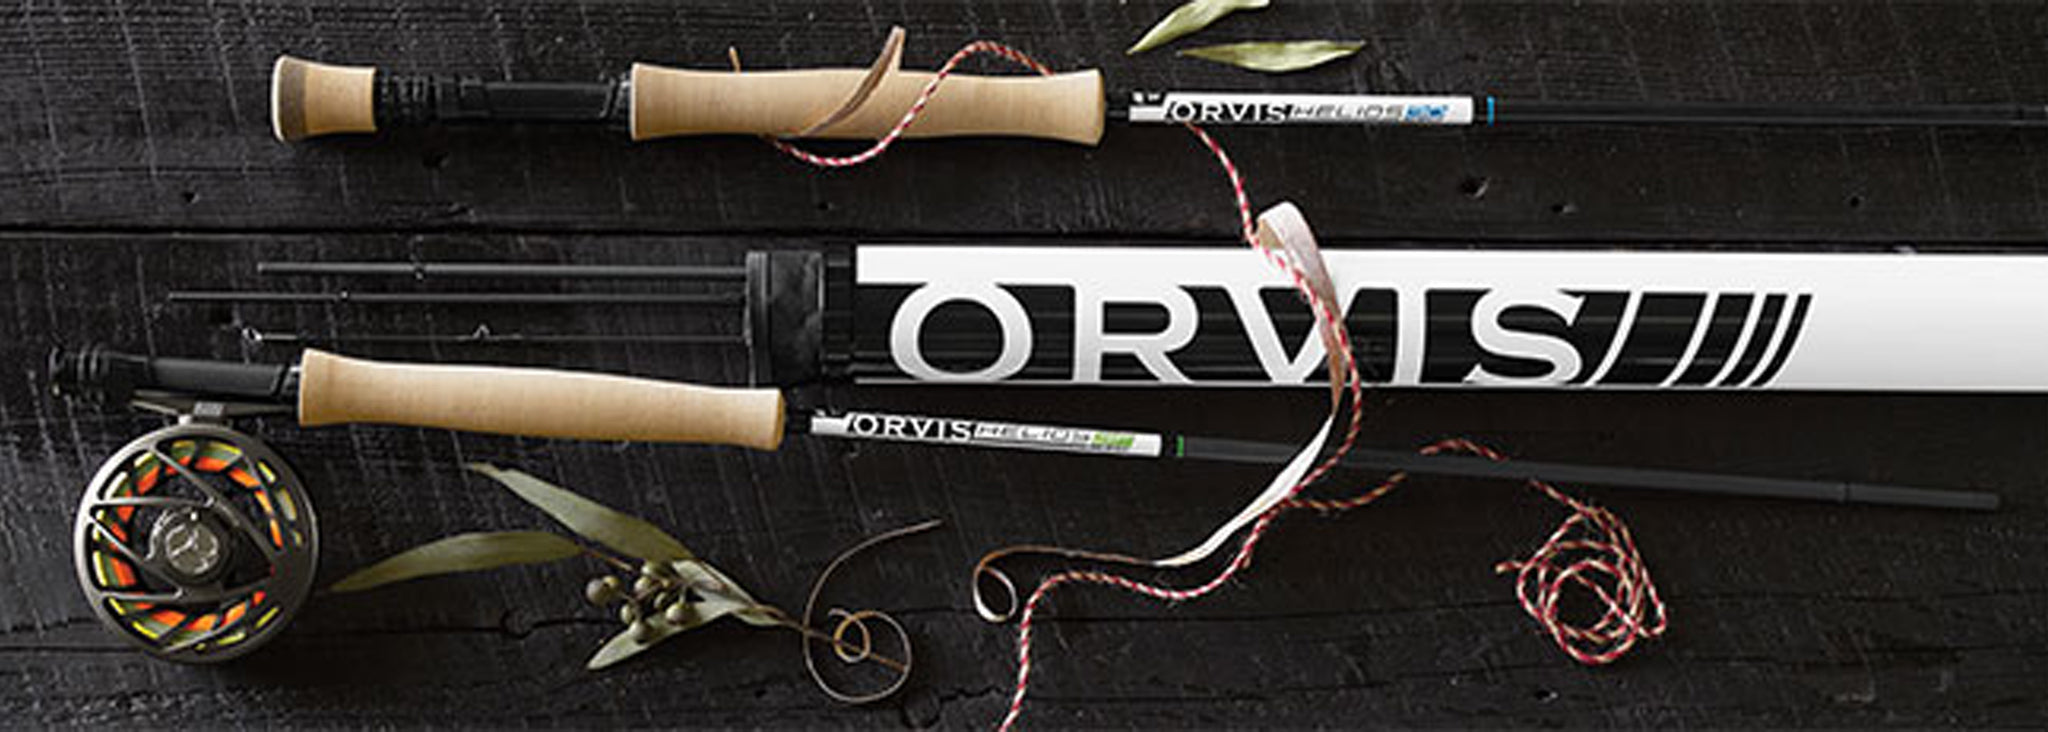 orvis helios rod review